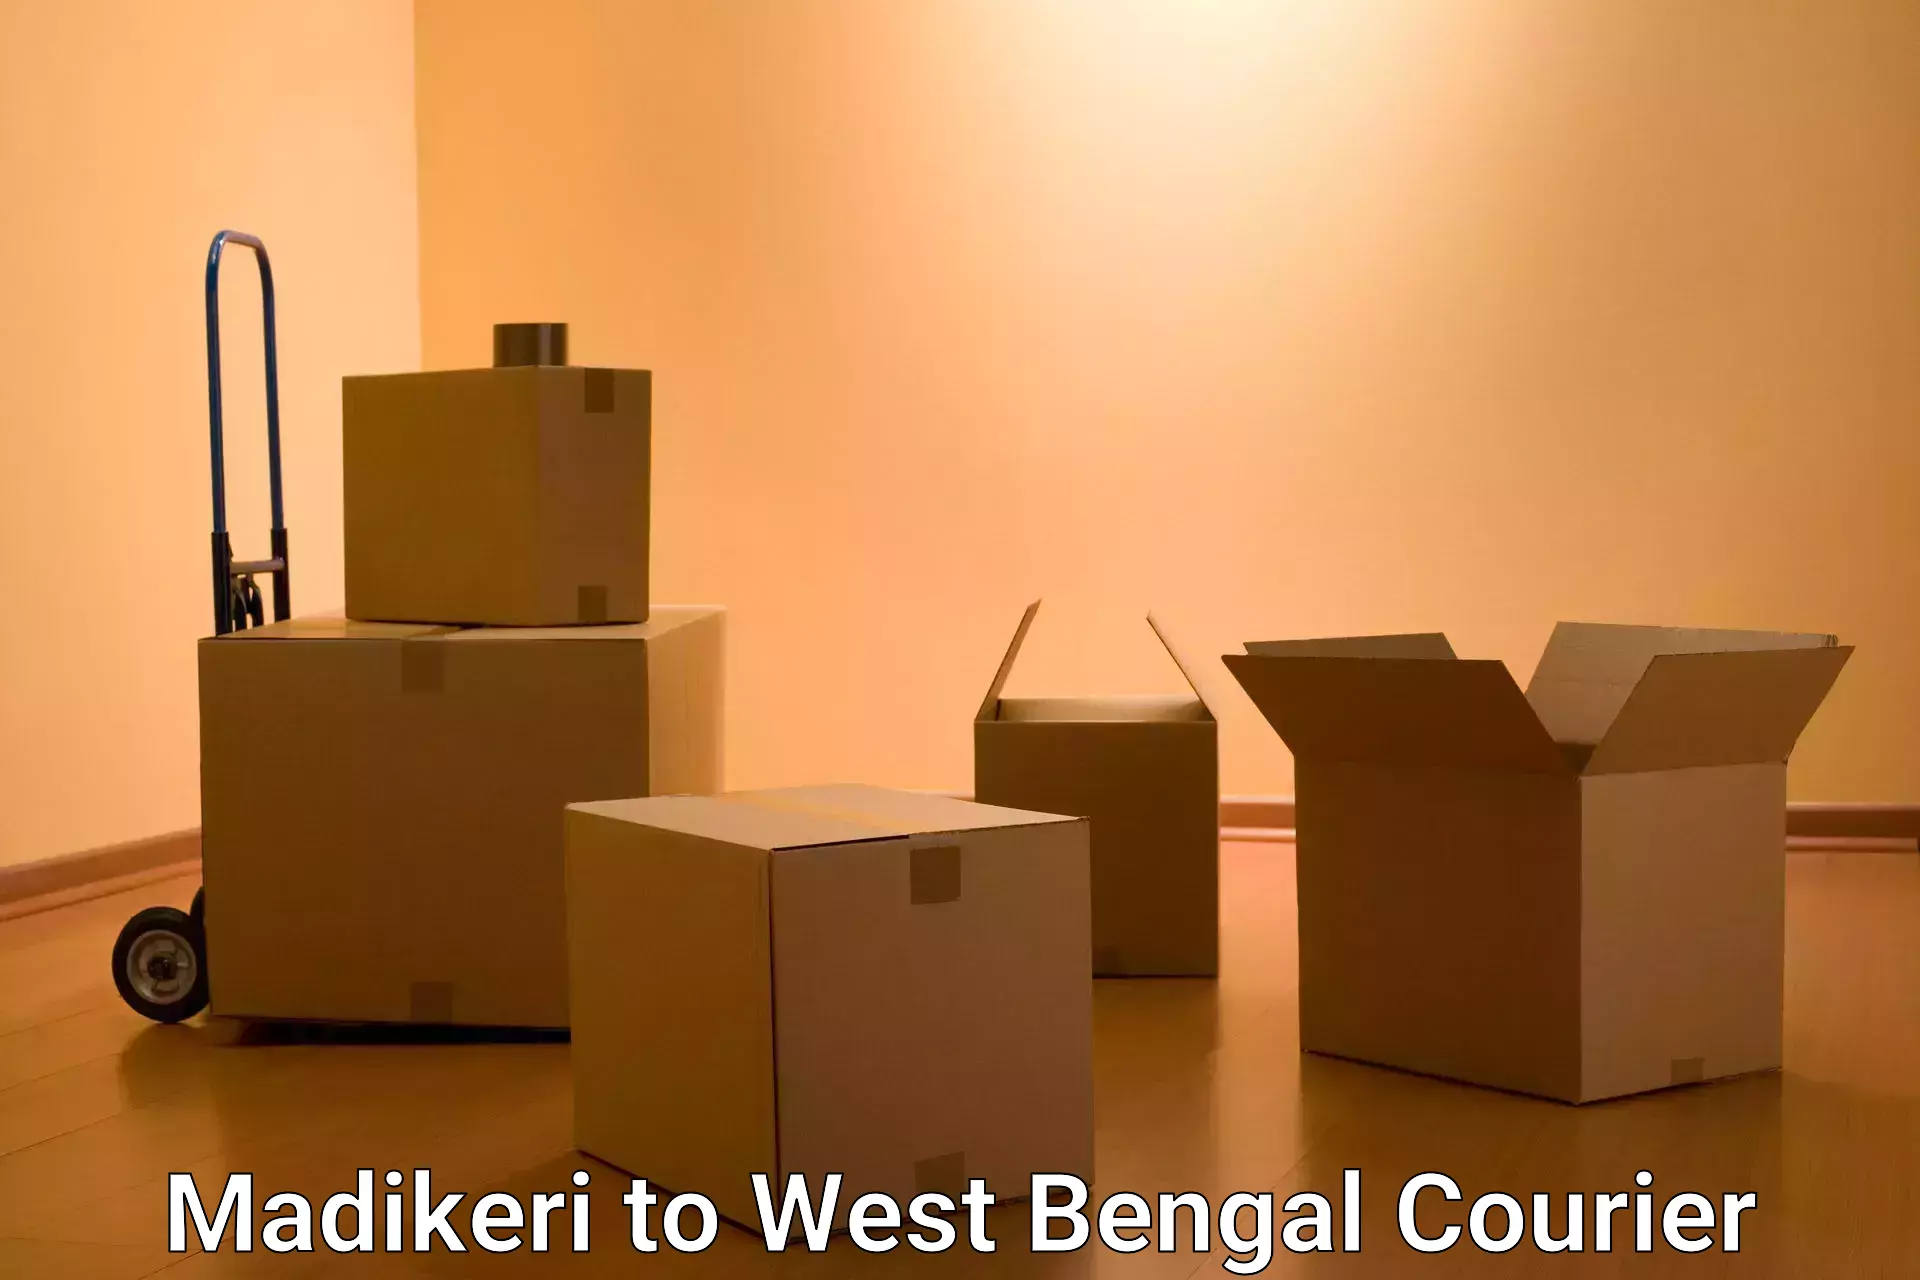 High-speed parcel service Madikeri to West Bengal